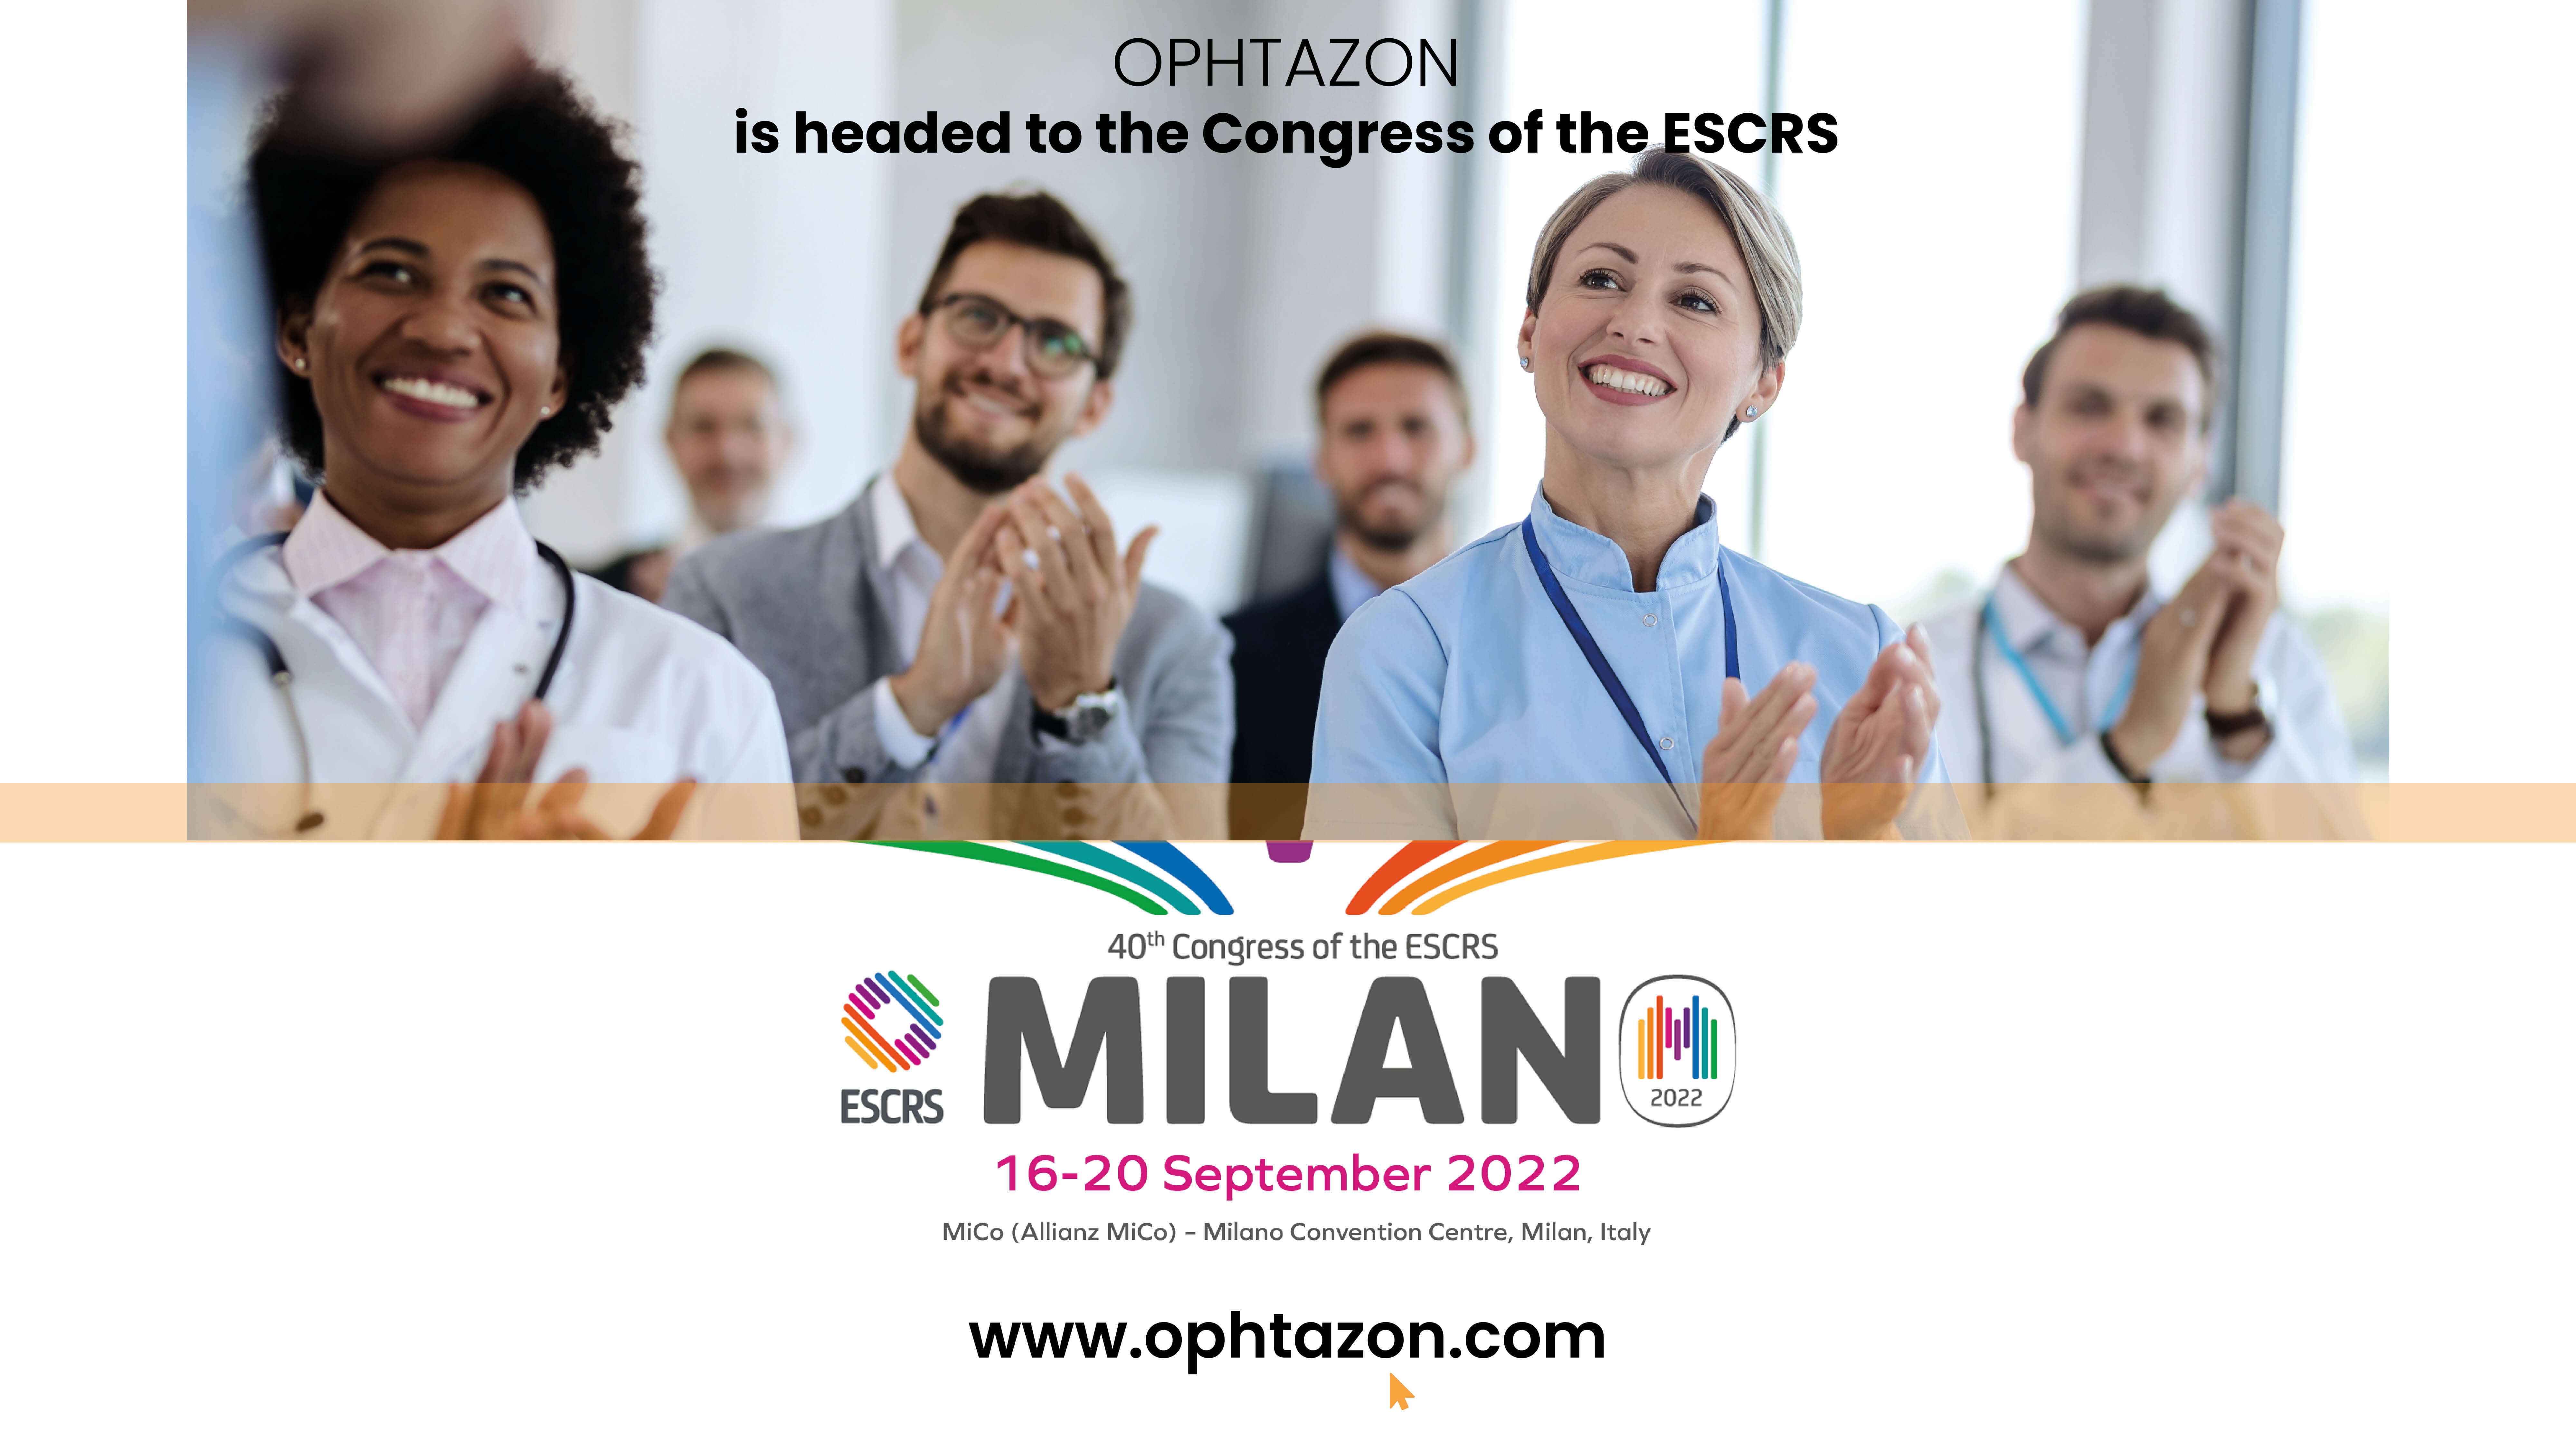 OPHTAZON is headed to the Congress of the ESCRS